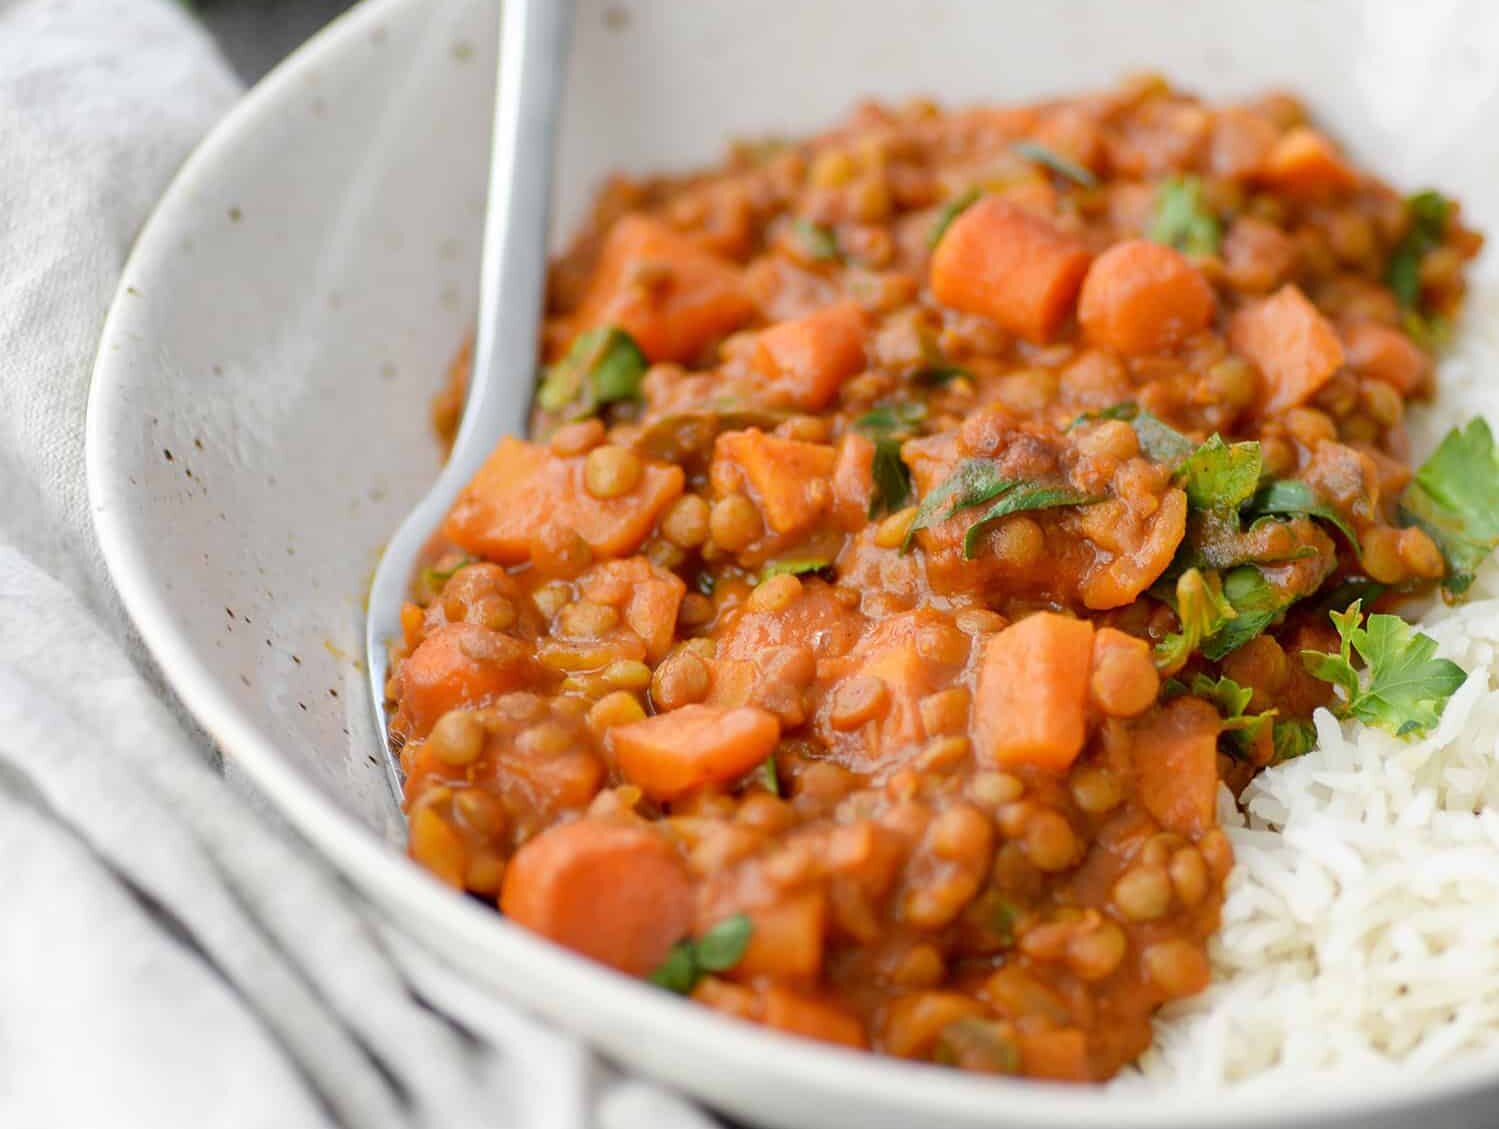 spicy coconut curry lentils with a side of rice.